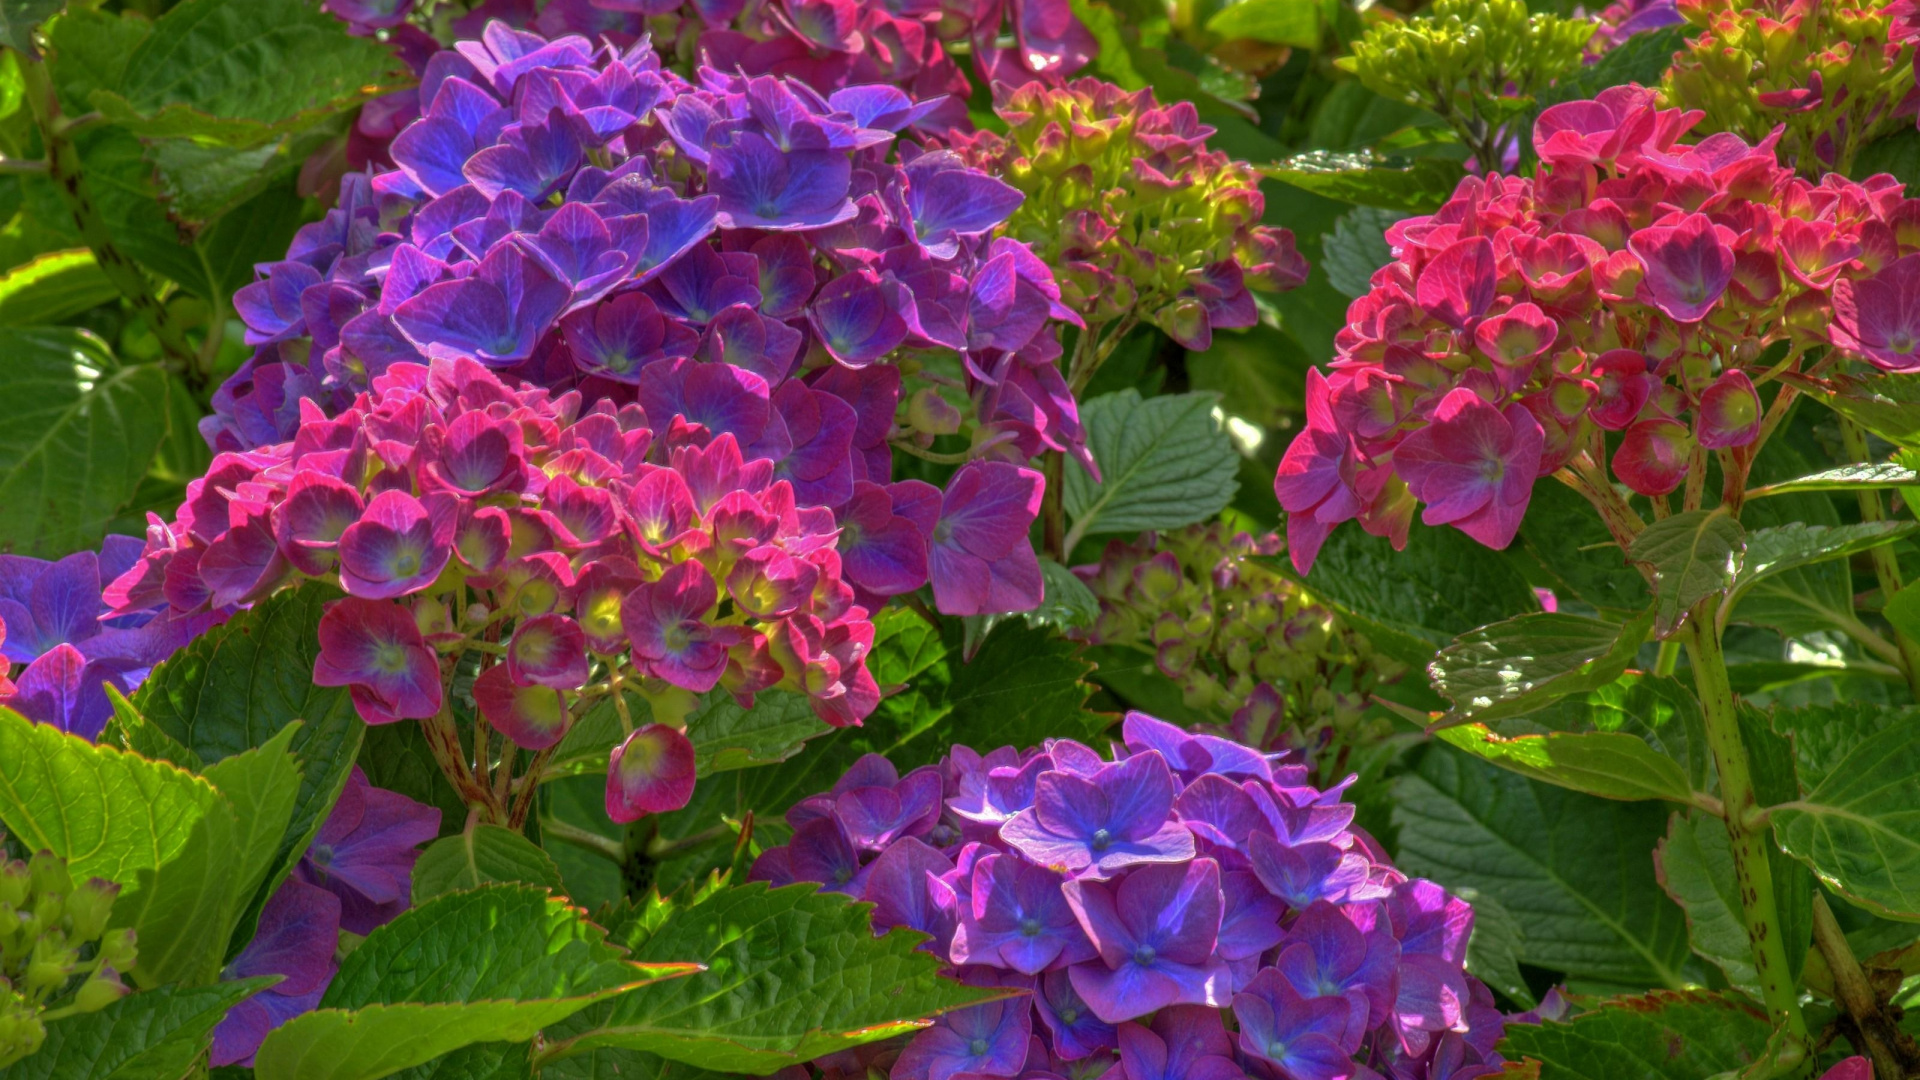 Purple Flowers With Green Leaves. Wallpaper in 1920x1080 Resolution